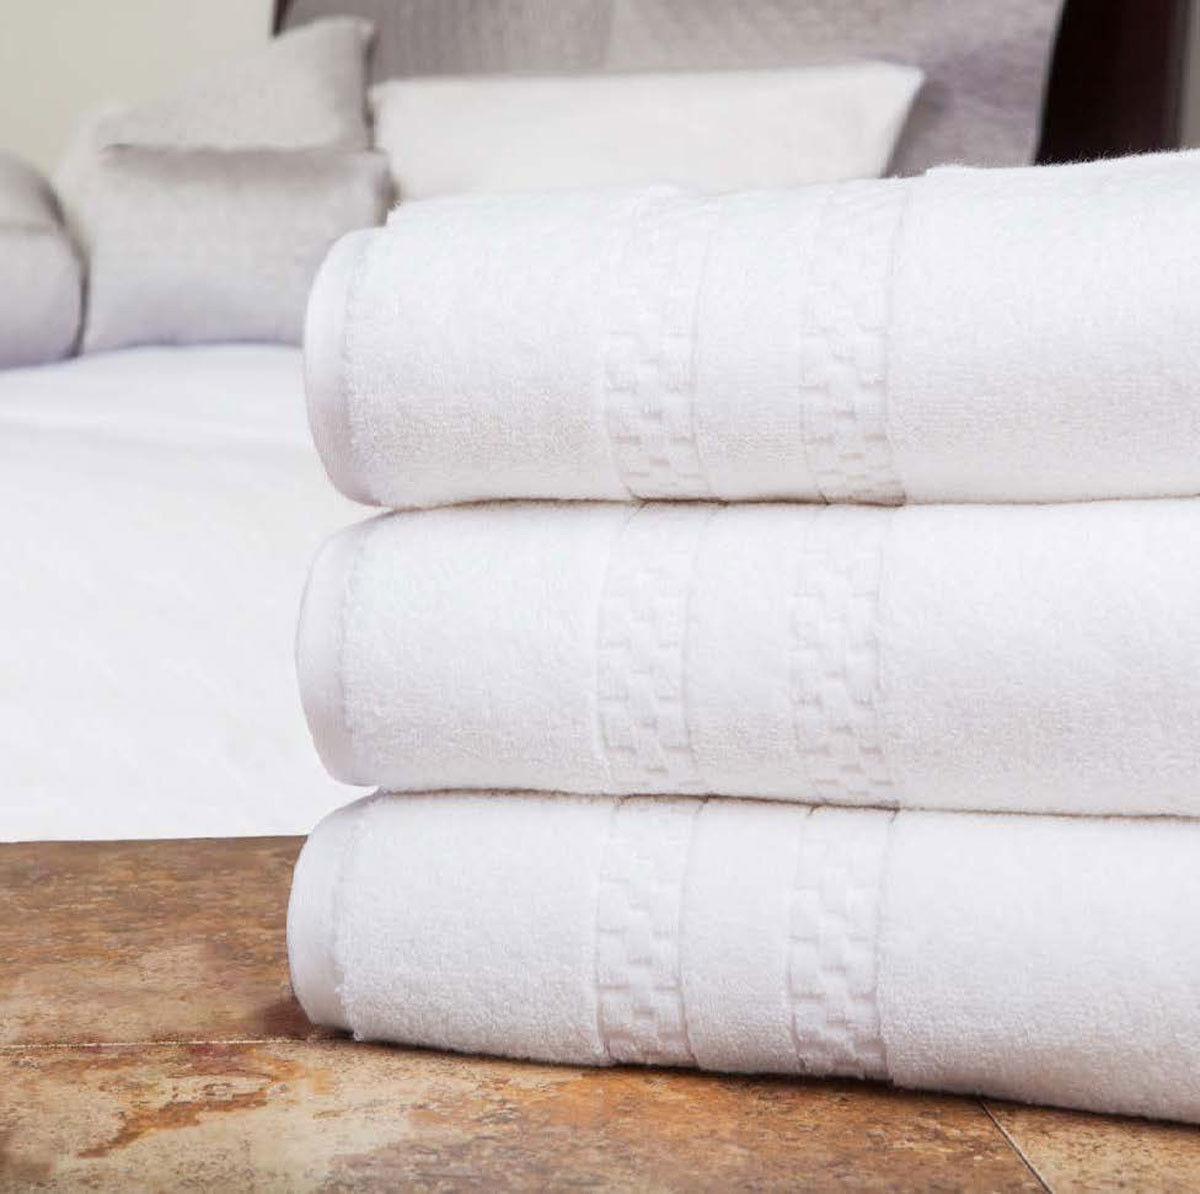 How is the hemming on the Villa di Sorrento towels?